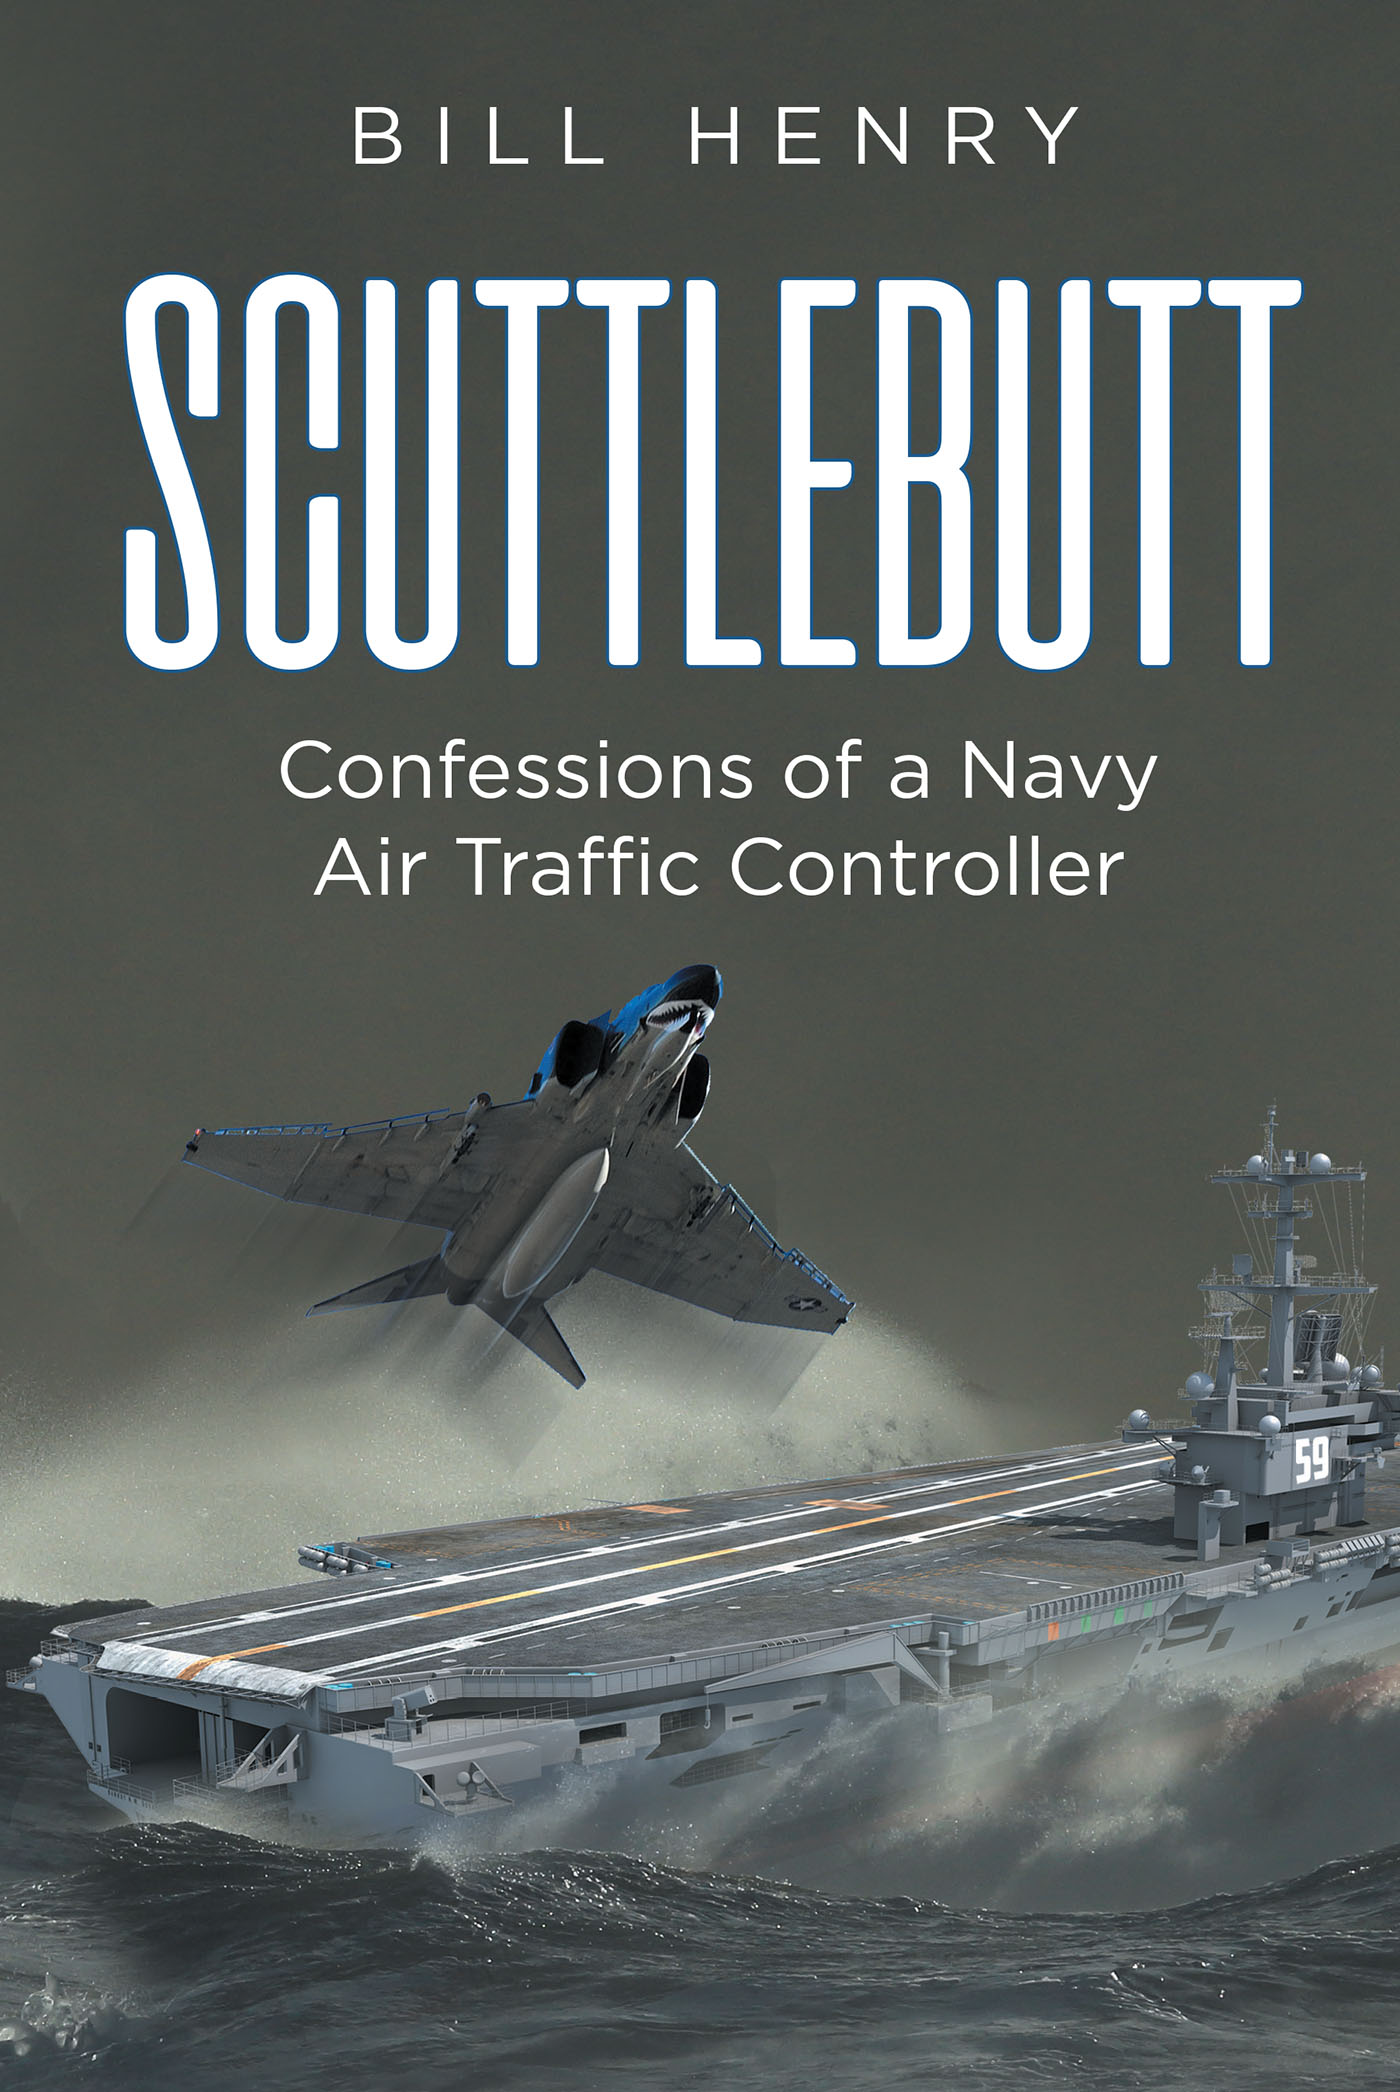 Author Bill Henry’s New Book, "Scuttlebutt: Confessions of a Navy Air Traffic Controller," is a Fascinating Work That Chronicles the Life of a Sailor